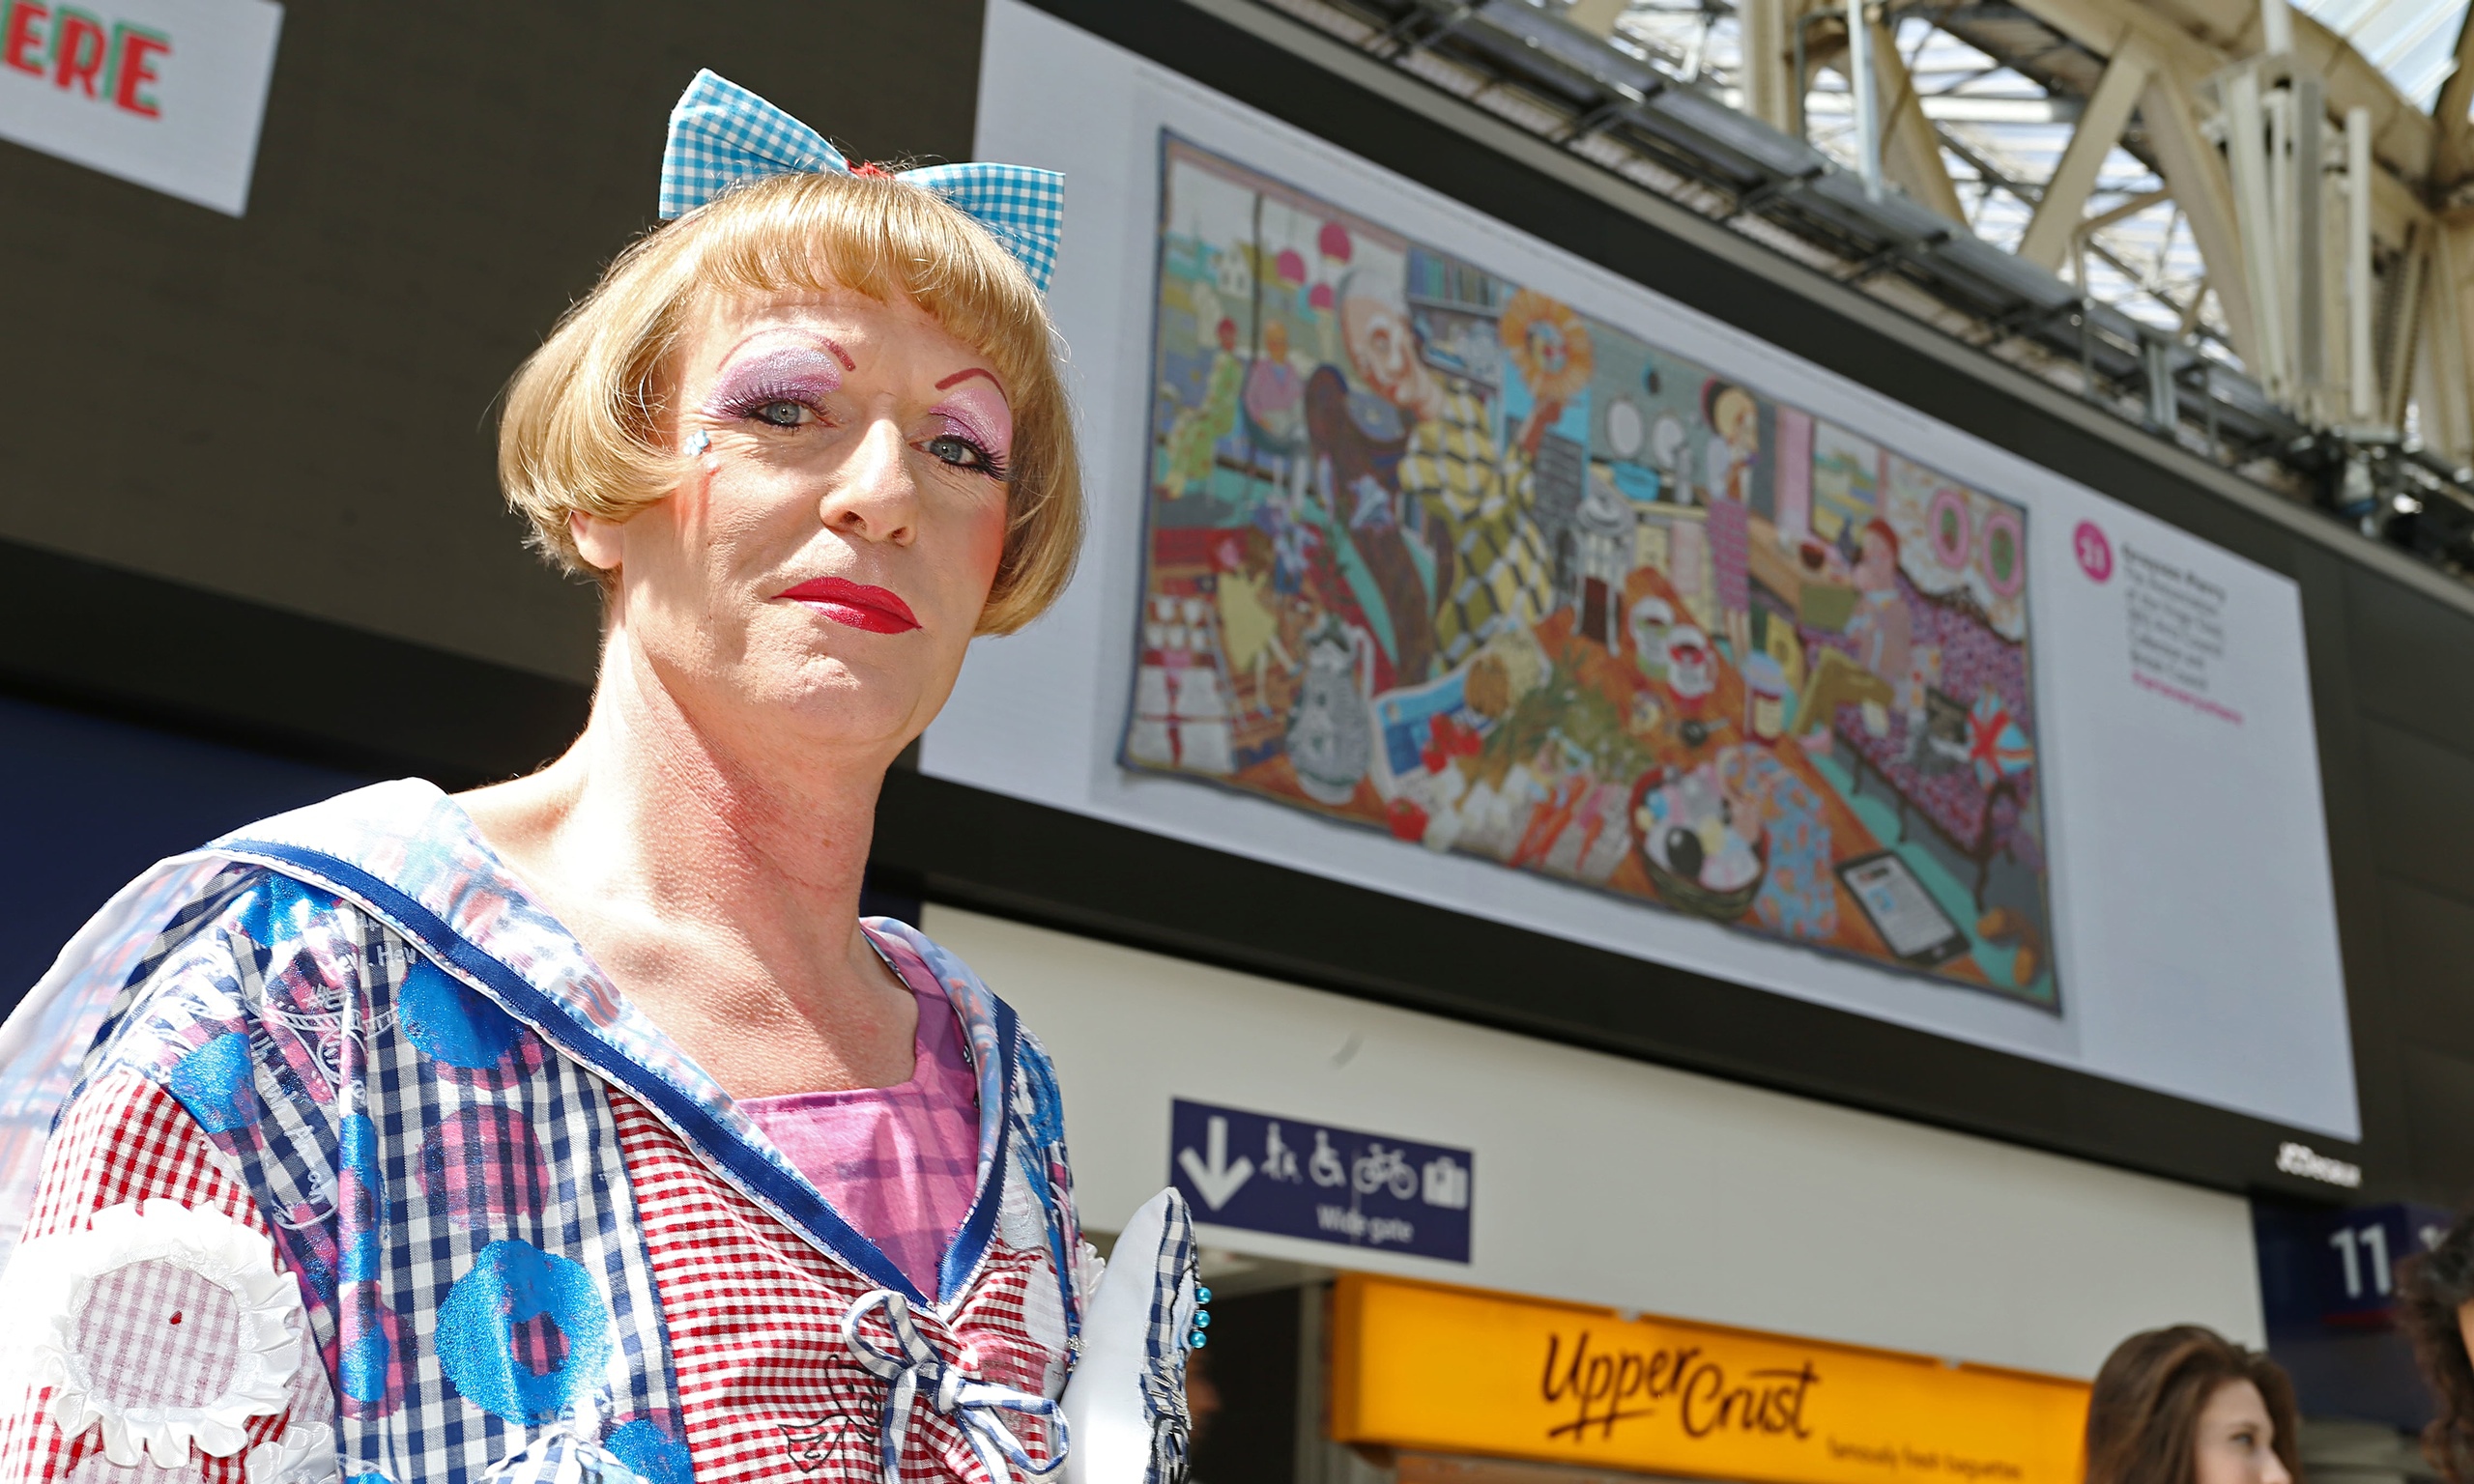 Grayson Perry at the Art Everywhere launch